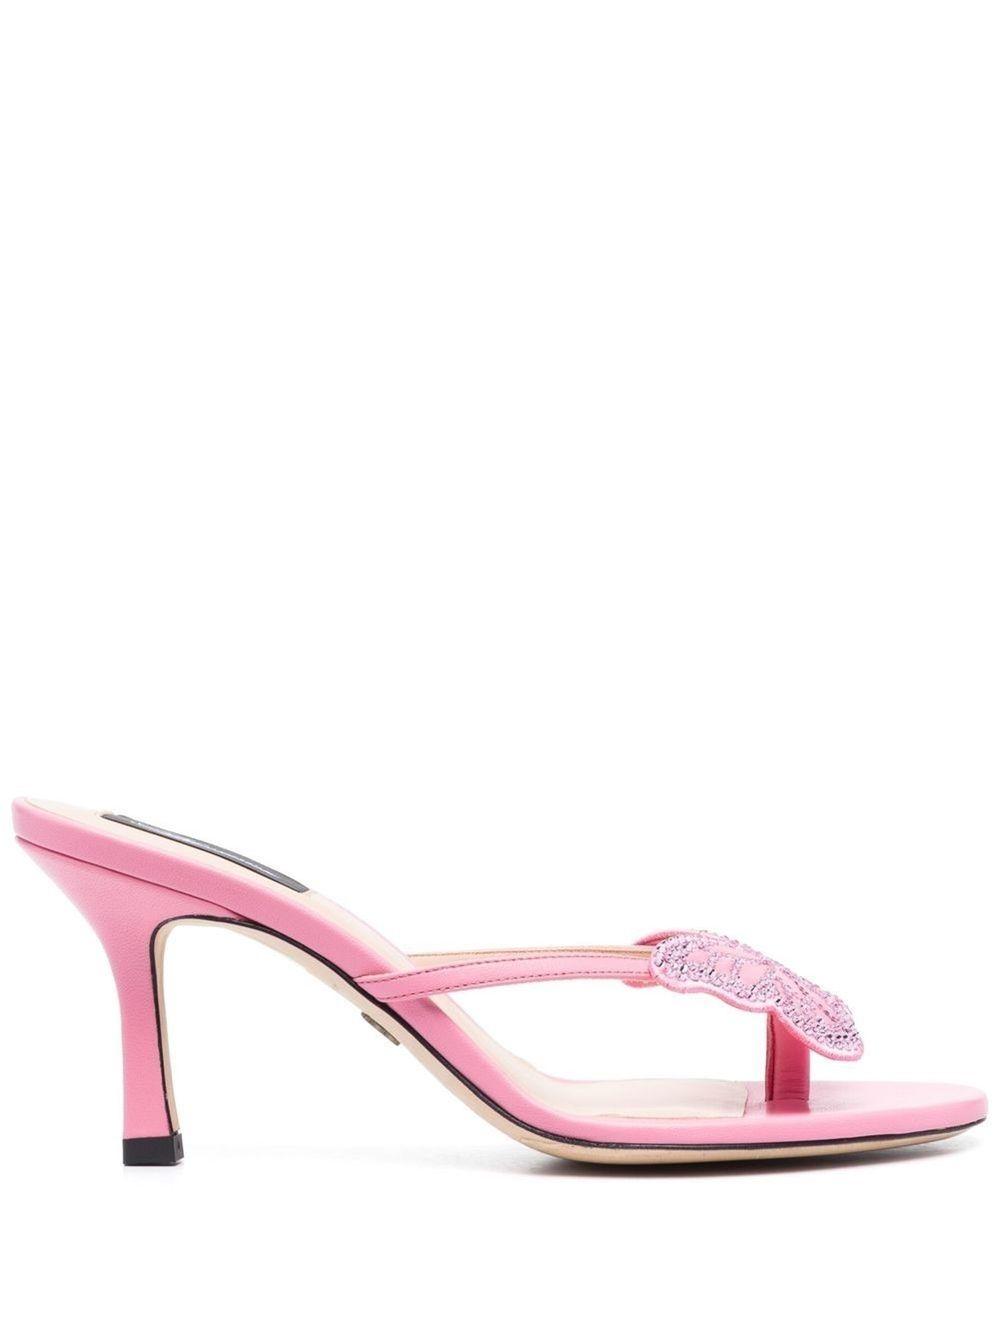 Blumarine Butterfly-patch 90mm Thong Sandals in Pink | Lyst